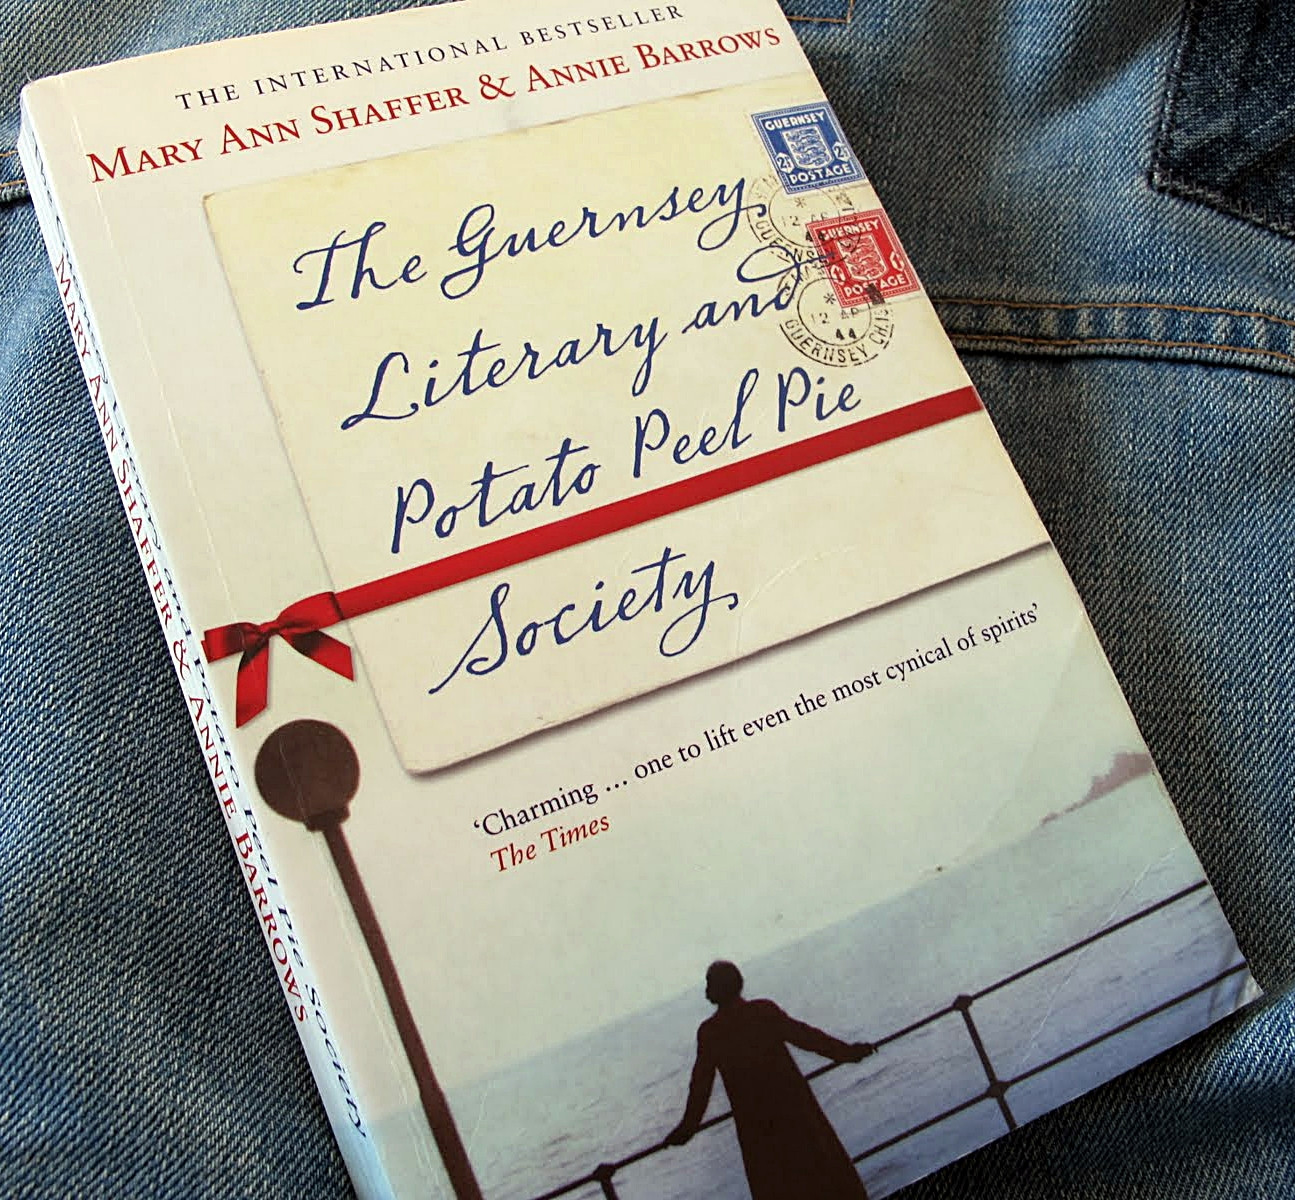 The Guernsey Literary And Potato Peel Book
 Mail Adventures The Guernsey Literary and Potato Peel Pie